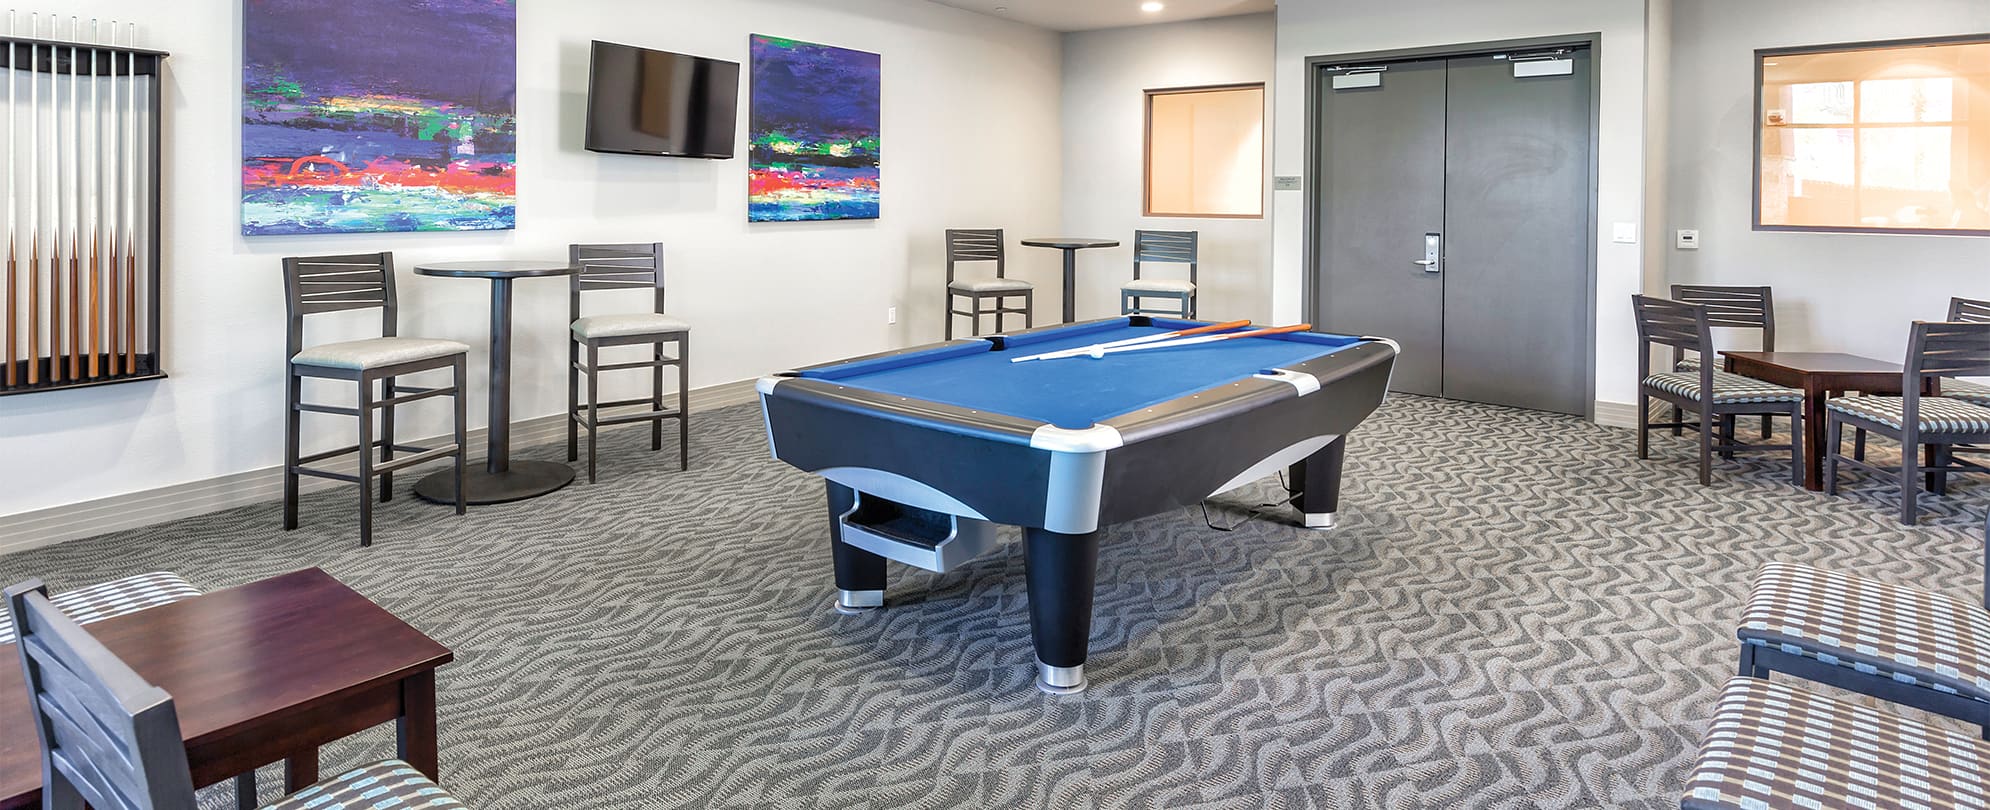 Room with a pool table, TV, and chairs at Margaritaville Vacation Club by Wyndham - Desert Blue in Las Vegas, NV.